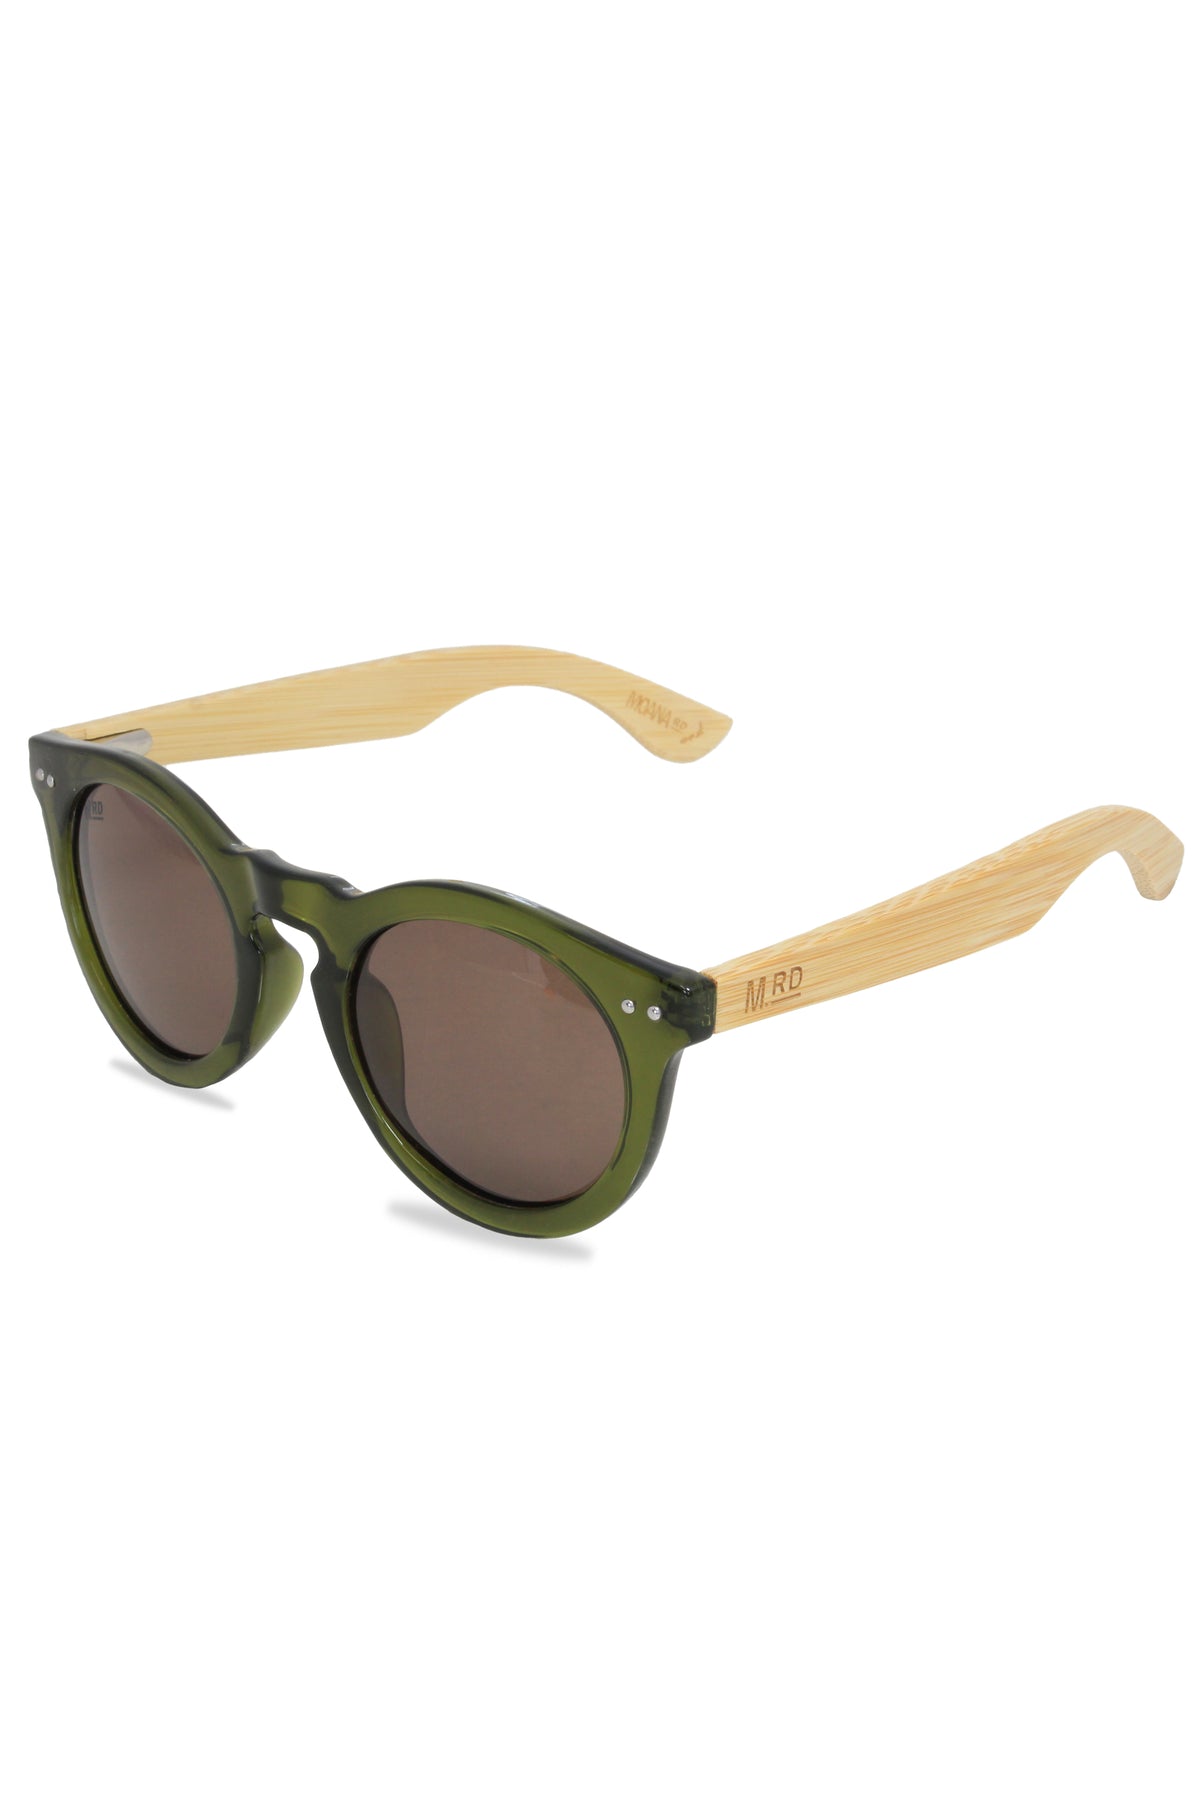 Grace Kelly Olive Green Sunnies